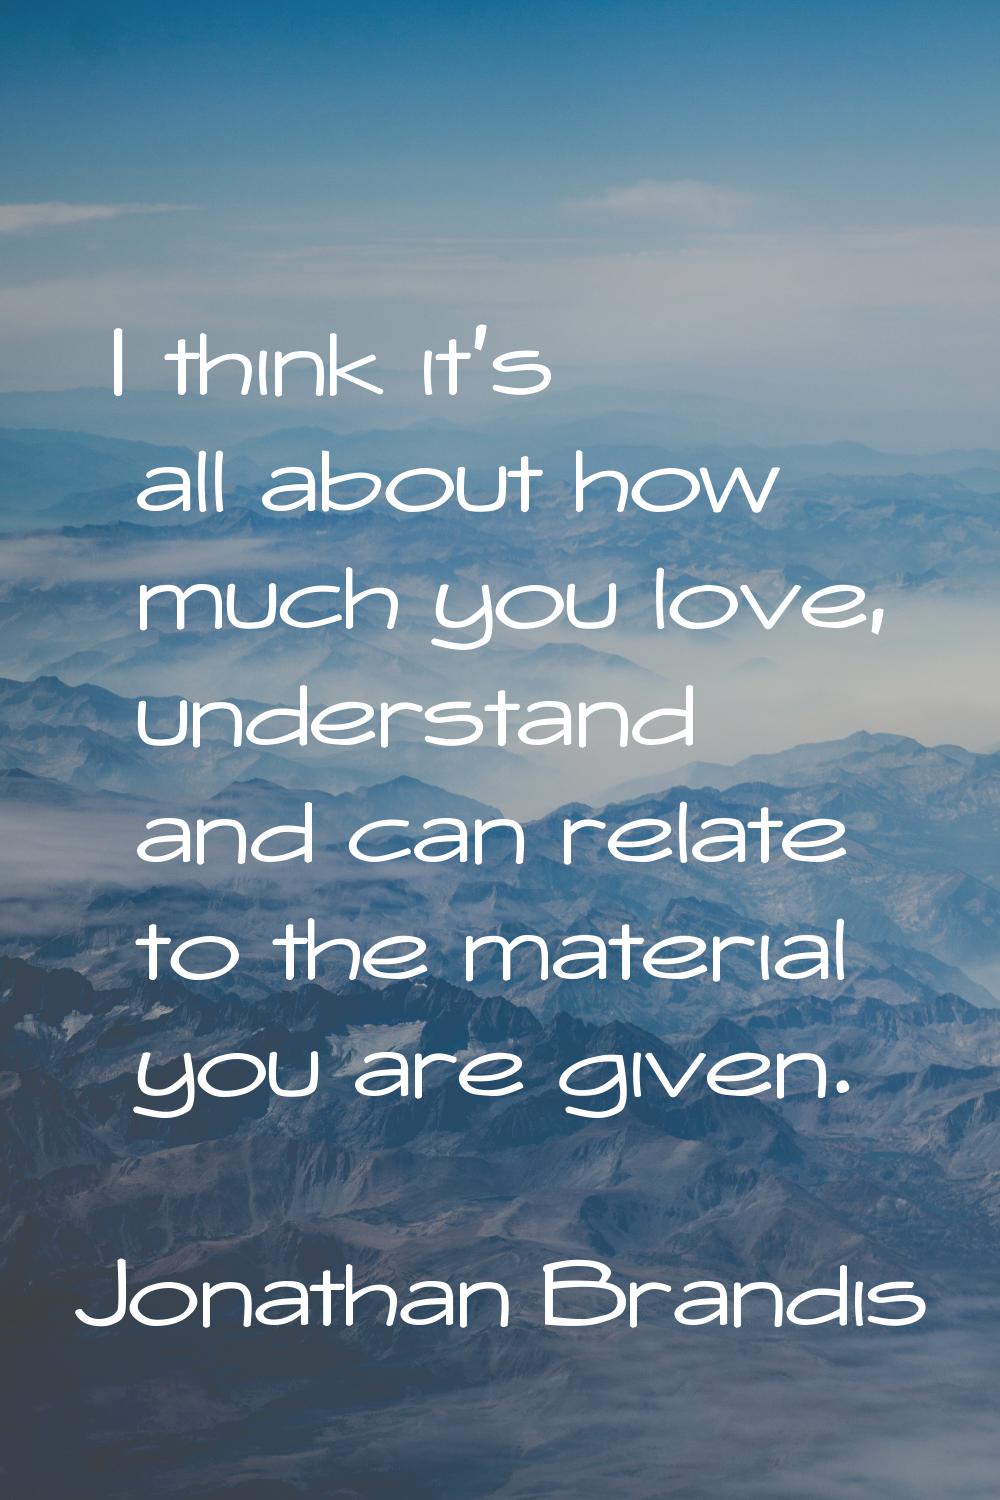 I think it's all about how much you love, understand and can relate to the material you are given.